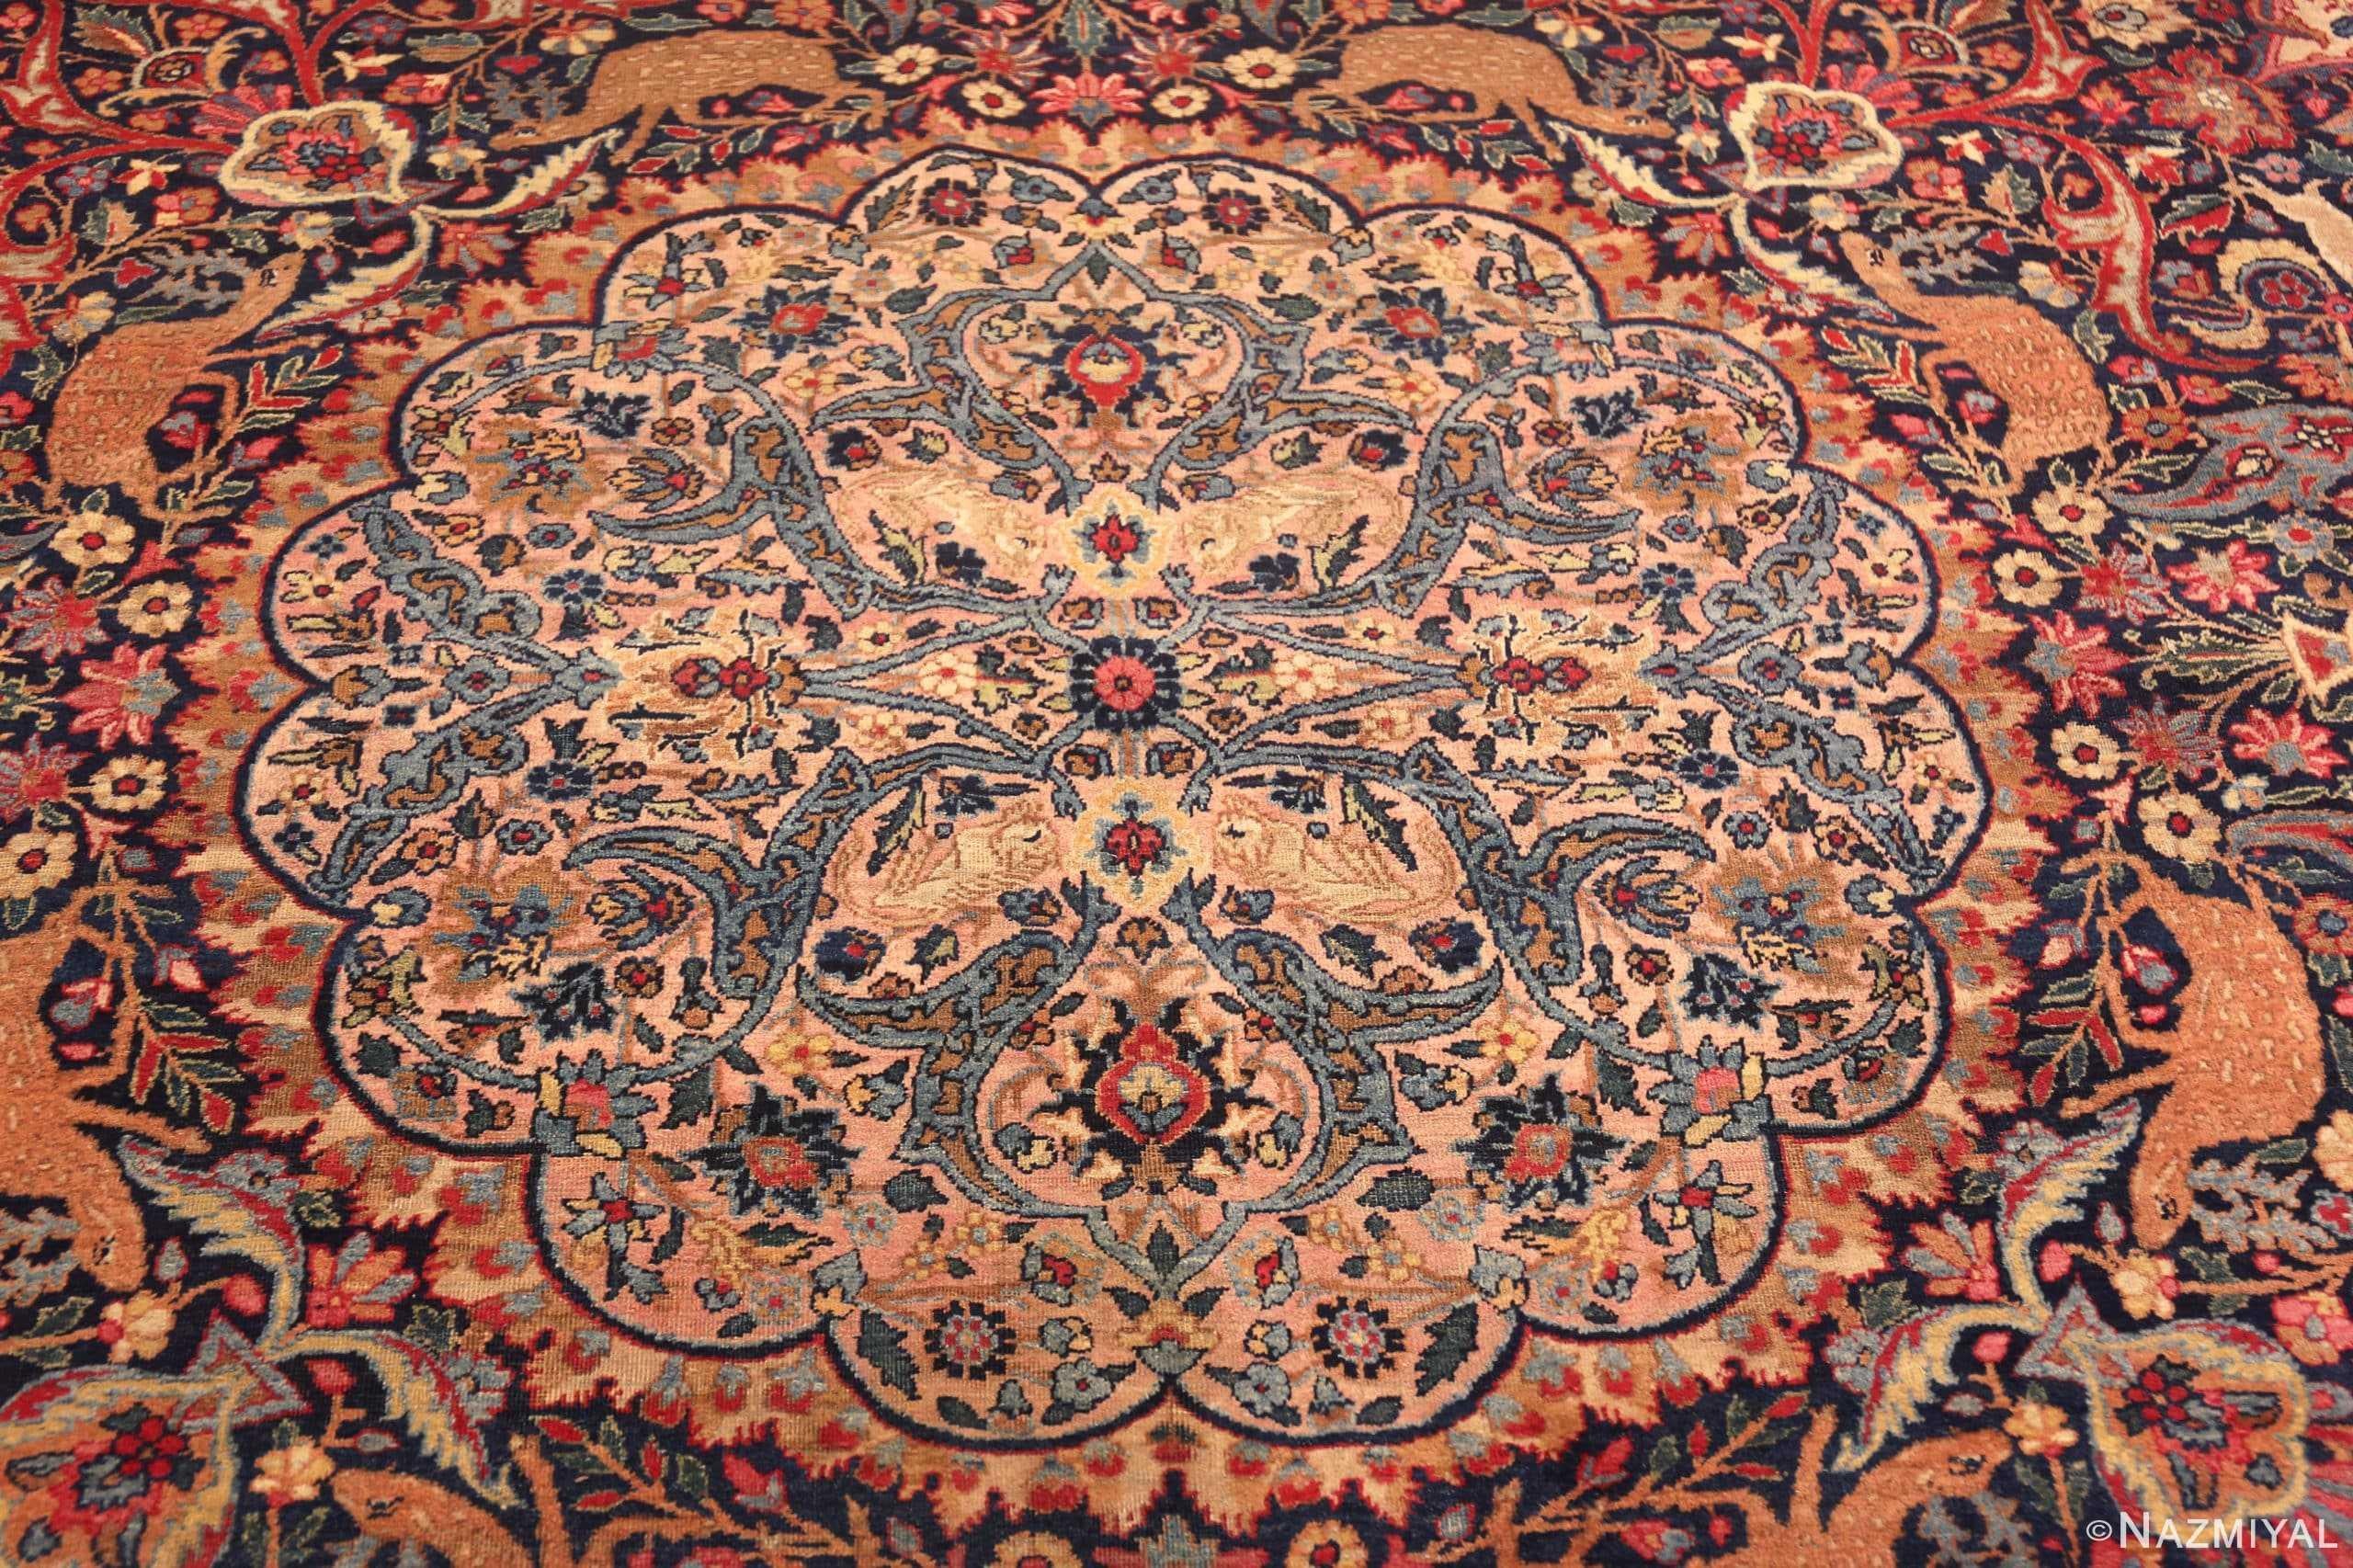 A Phenomenal Fine Weave Floral Animal Medallion Design Oversized Antique Persian Tabriz Area Rug, County / Rug Type: Antique Persian Rug, Circa Date: 1900